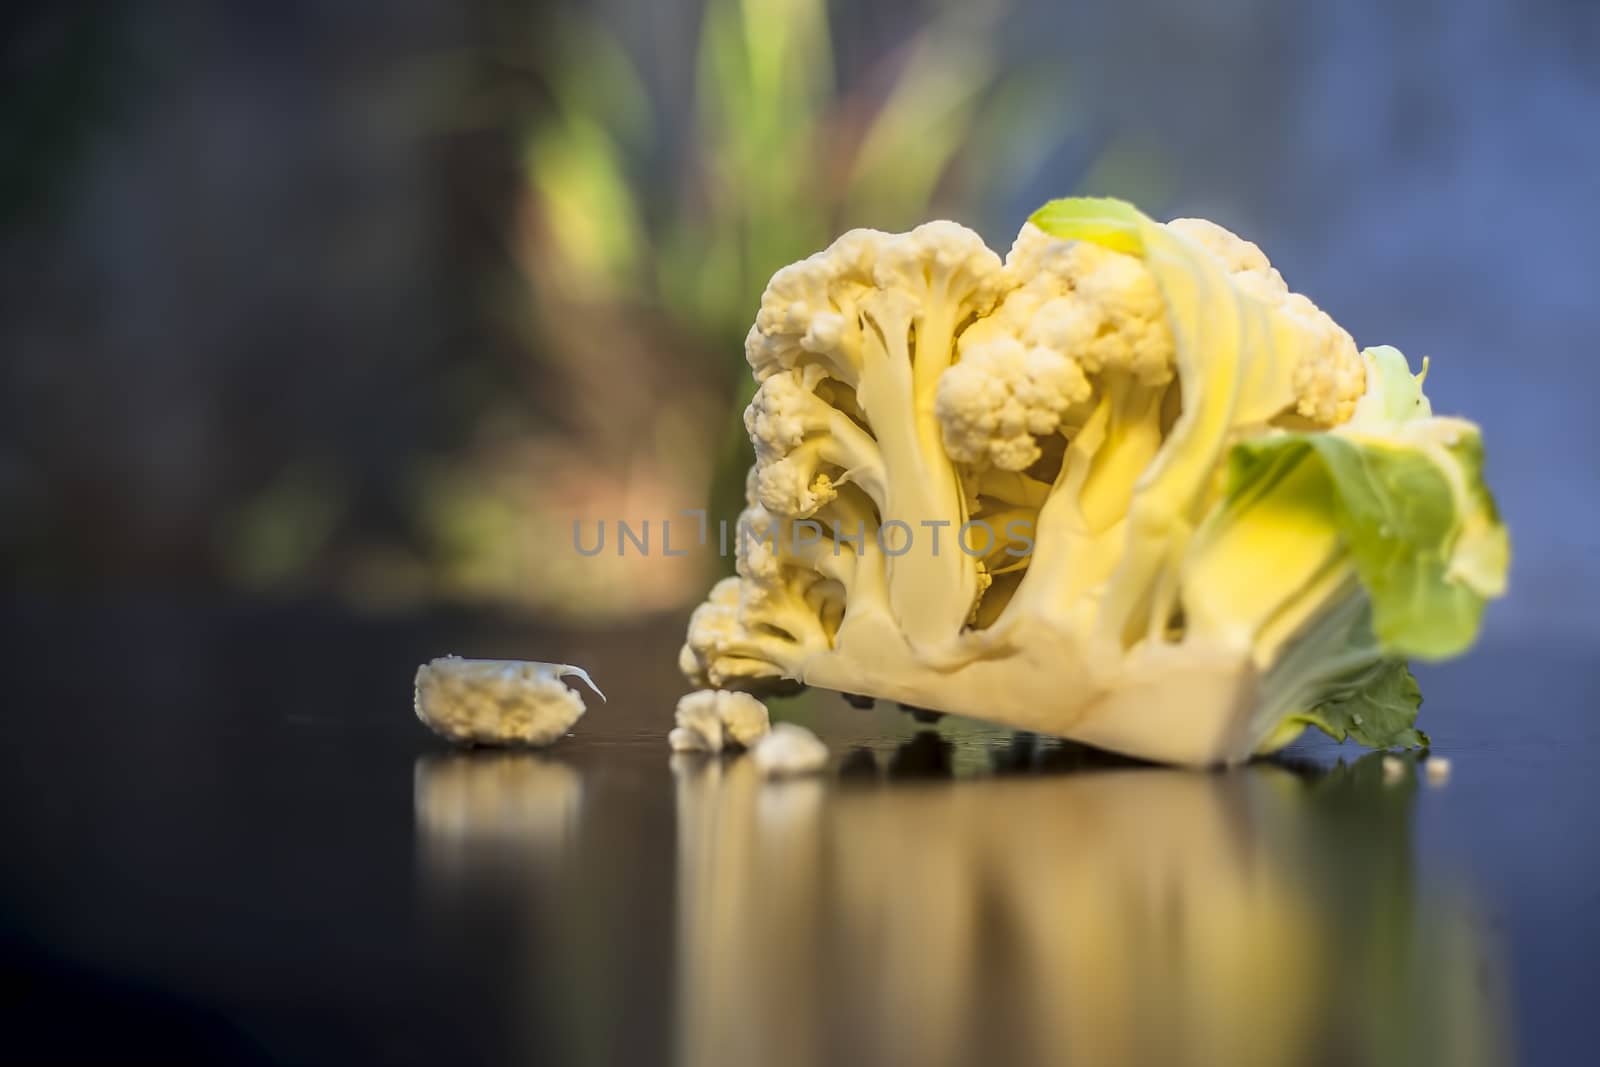 Close up shot of raw cauliflower on a black surface with selective focus, creative lighting, and blurred background.